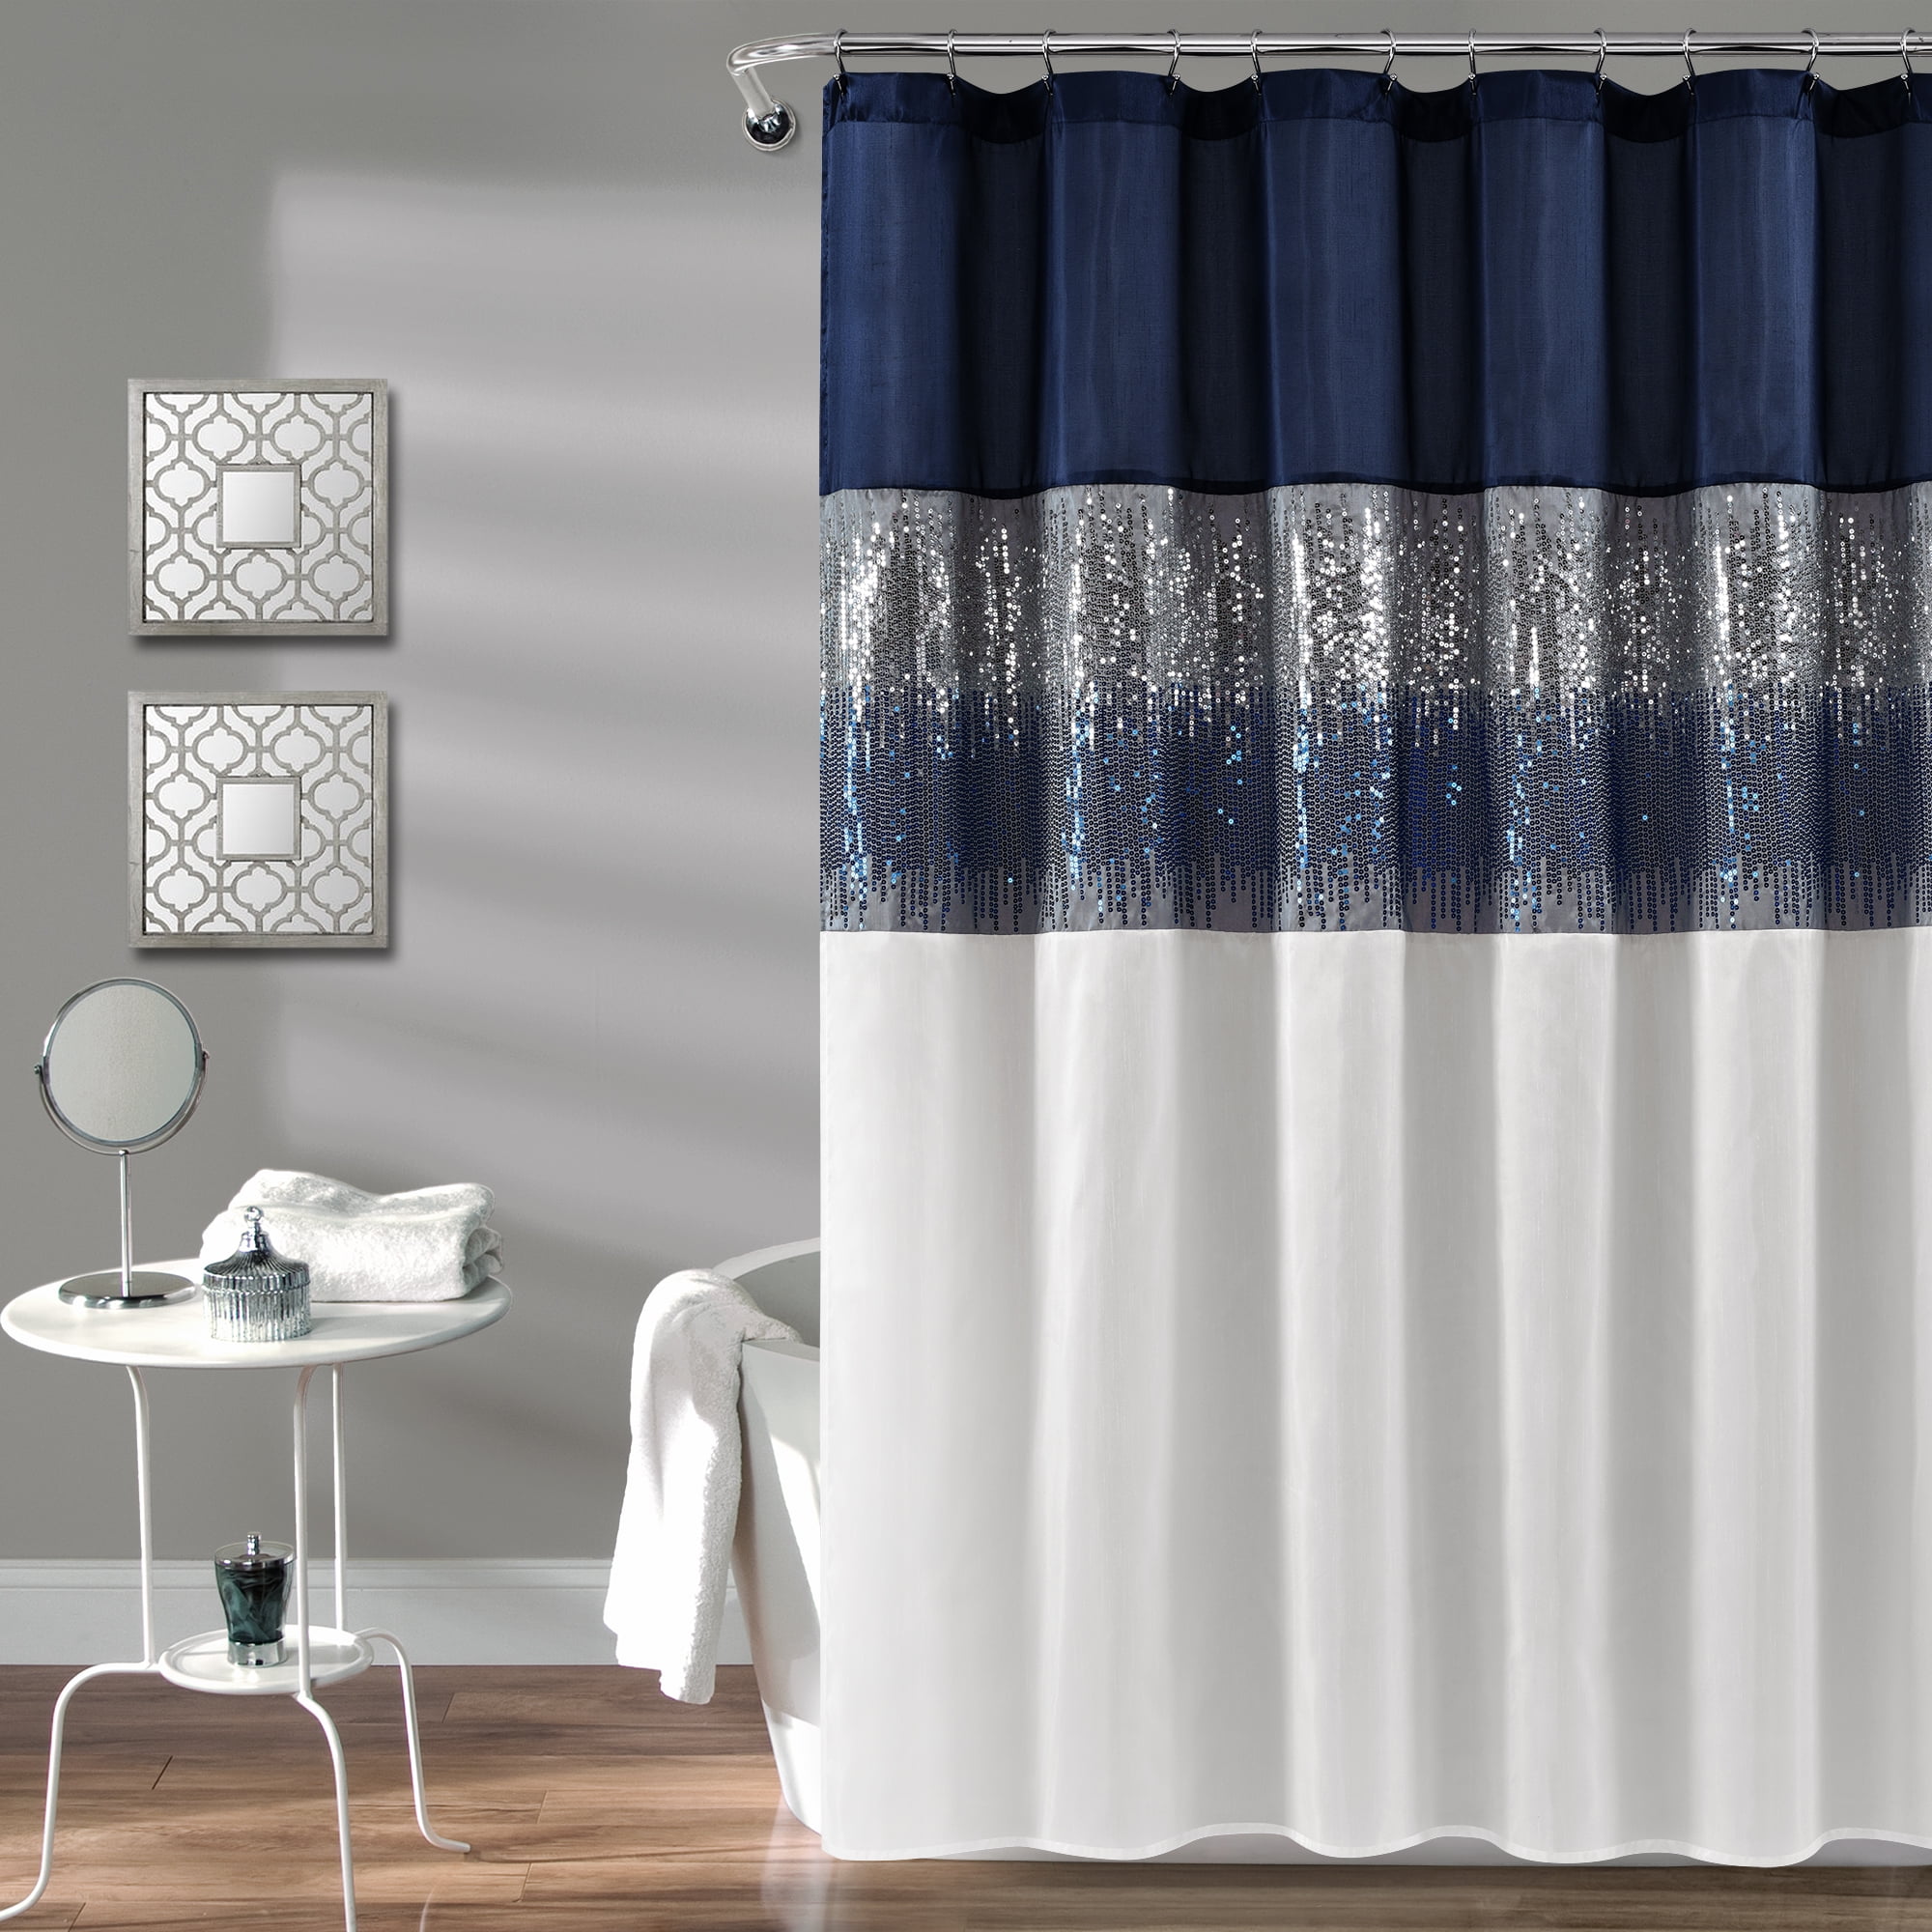 72 x 72 Room Essentials Shower Curtain Blue Leaves 